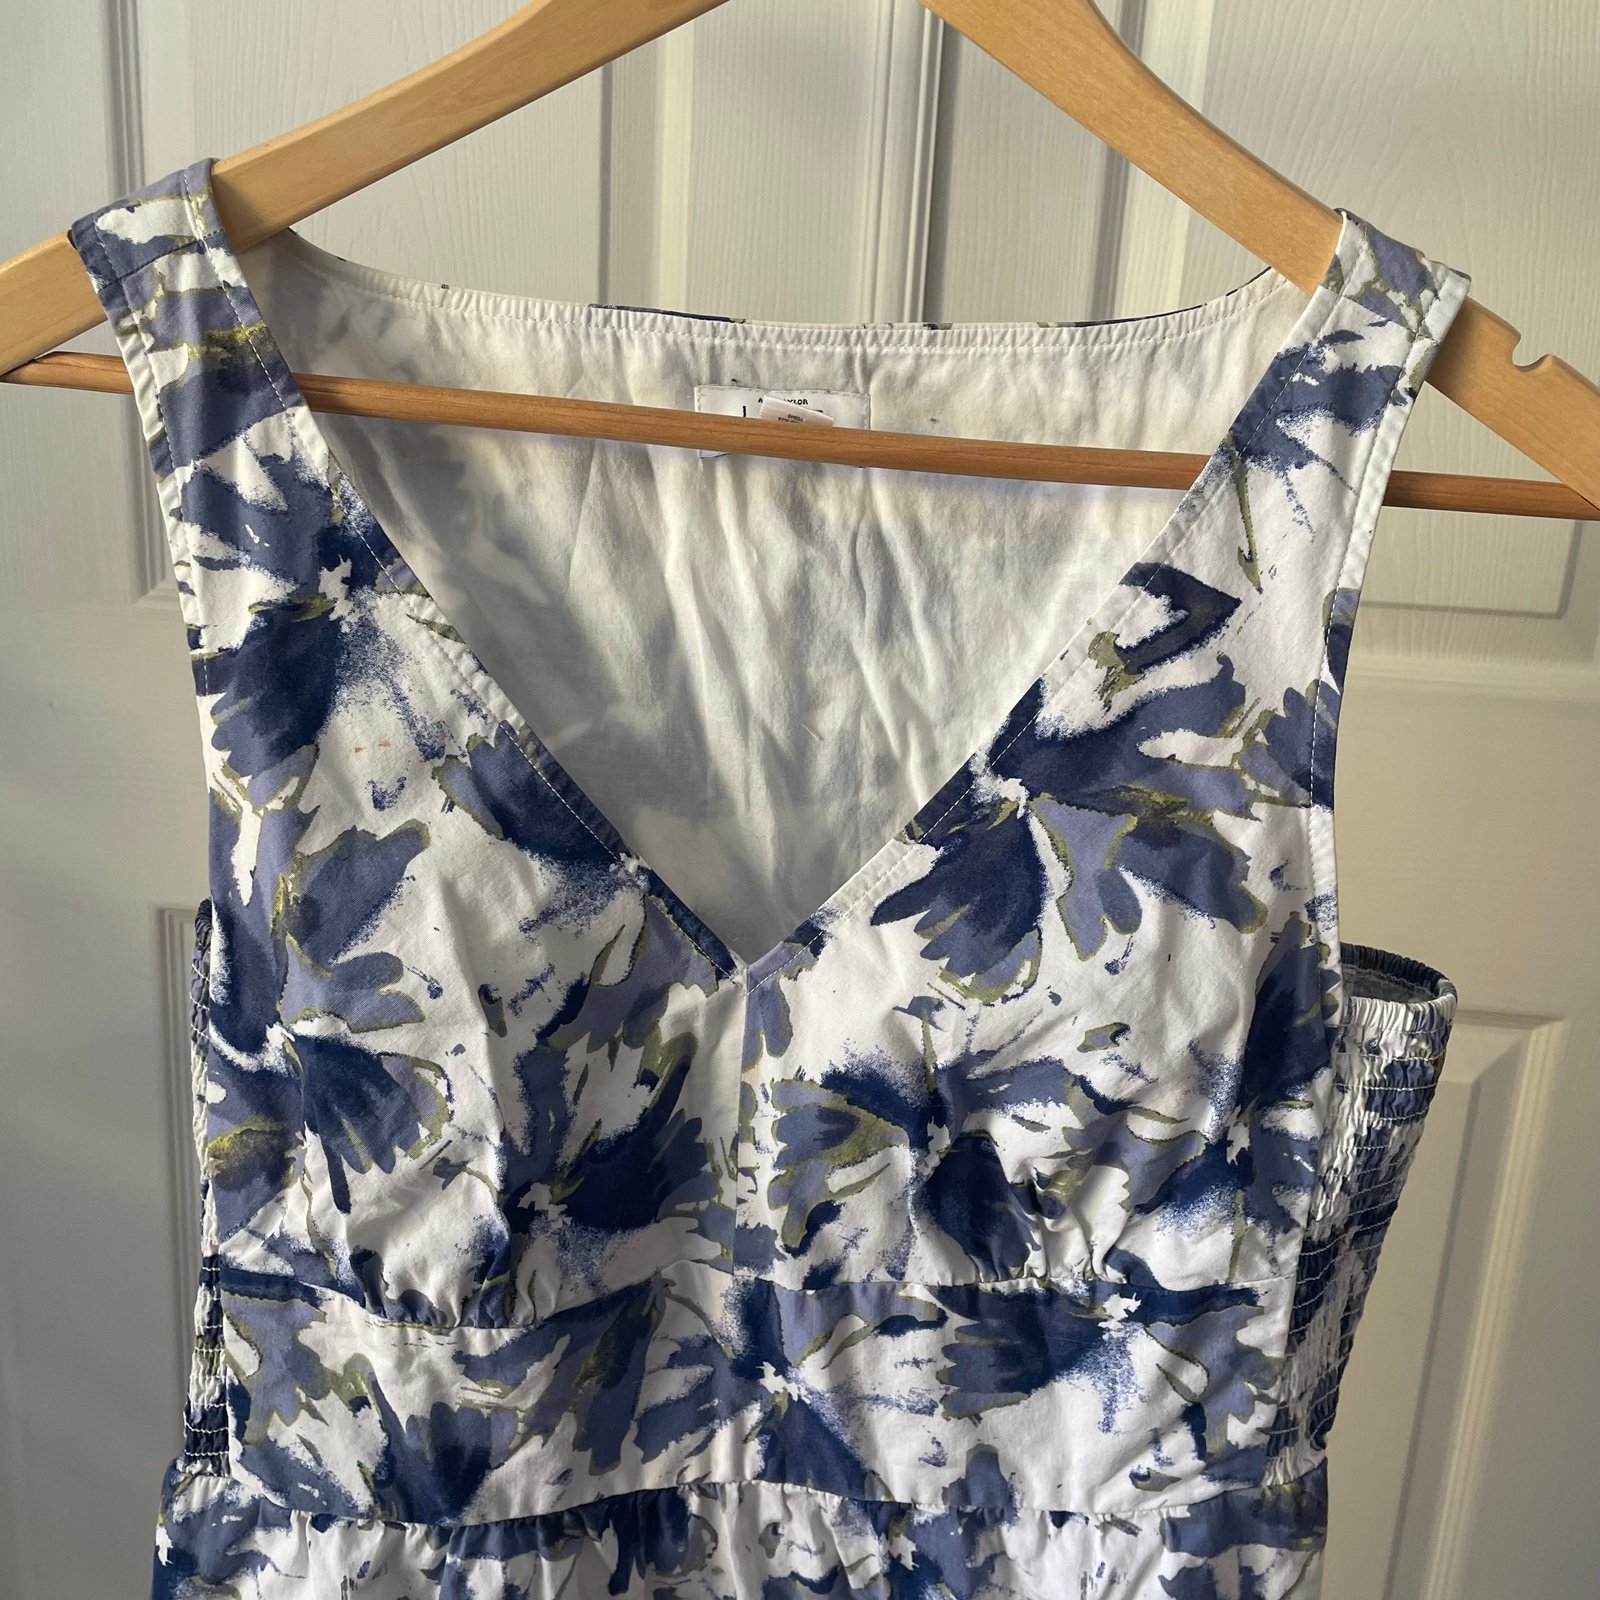 cheapest place to buy  Ann Taylor sundress MR99Rd3cy Outlet Store